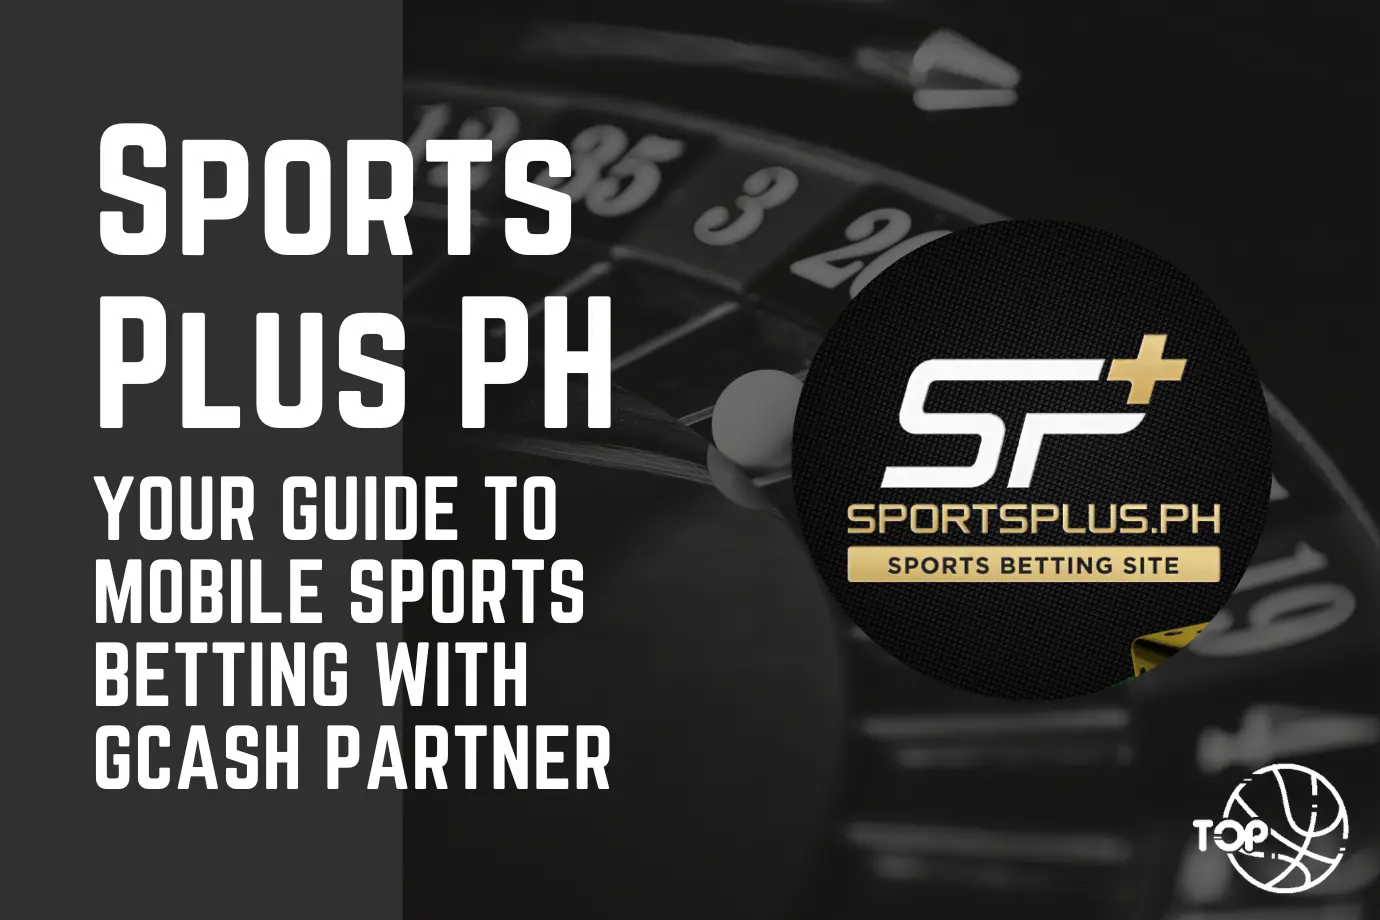 SportsPlus PH Your Guide to Mobile Sports Betting with GCash Partner